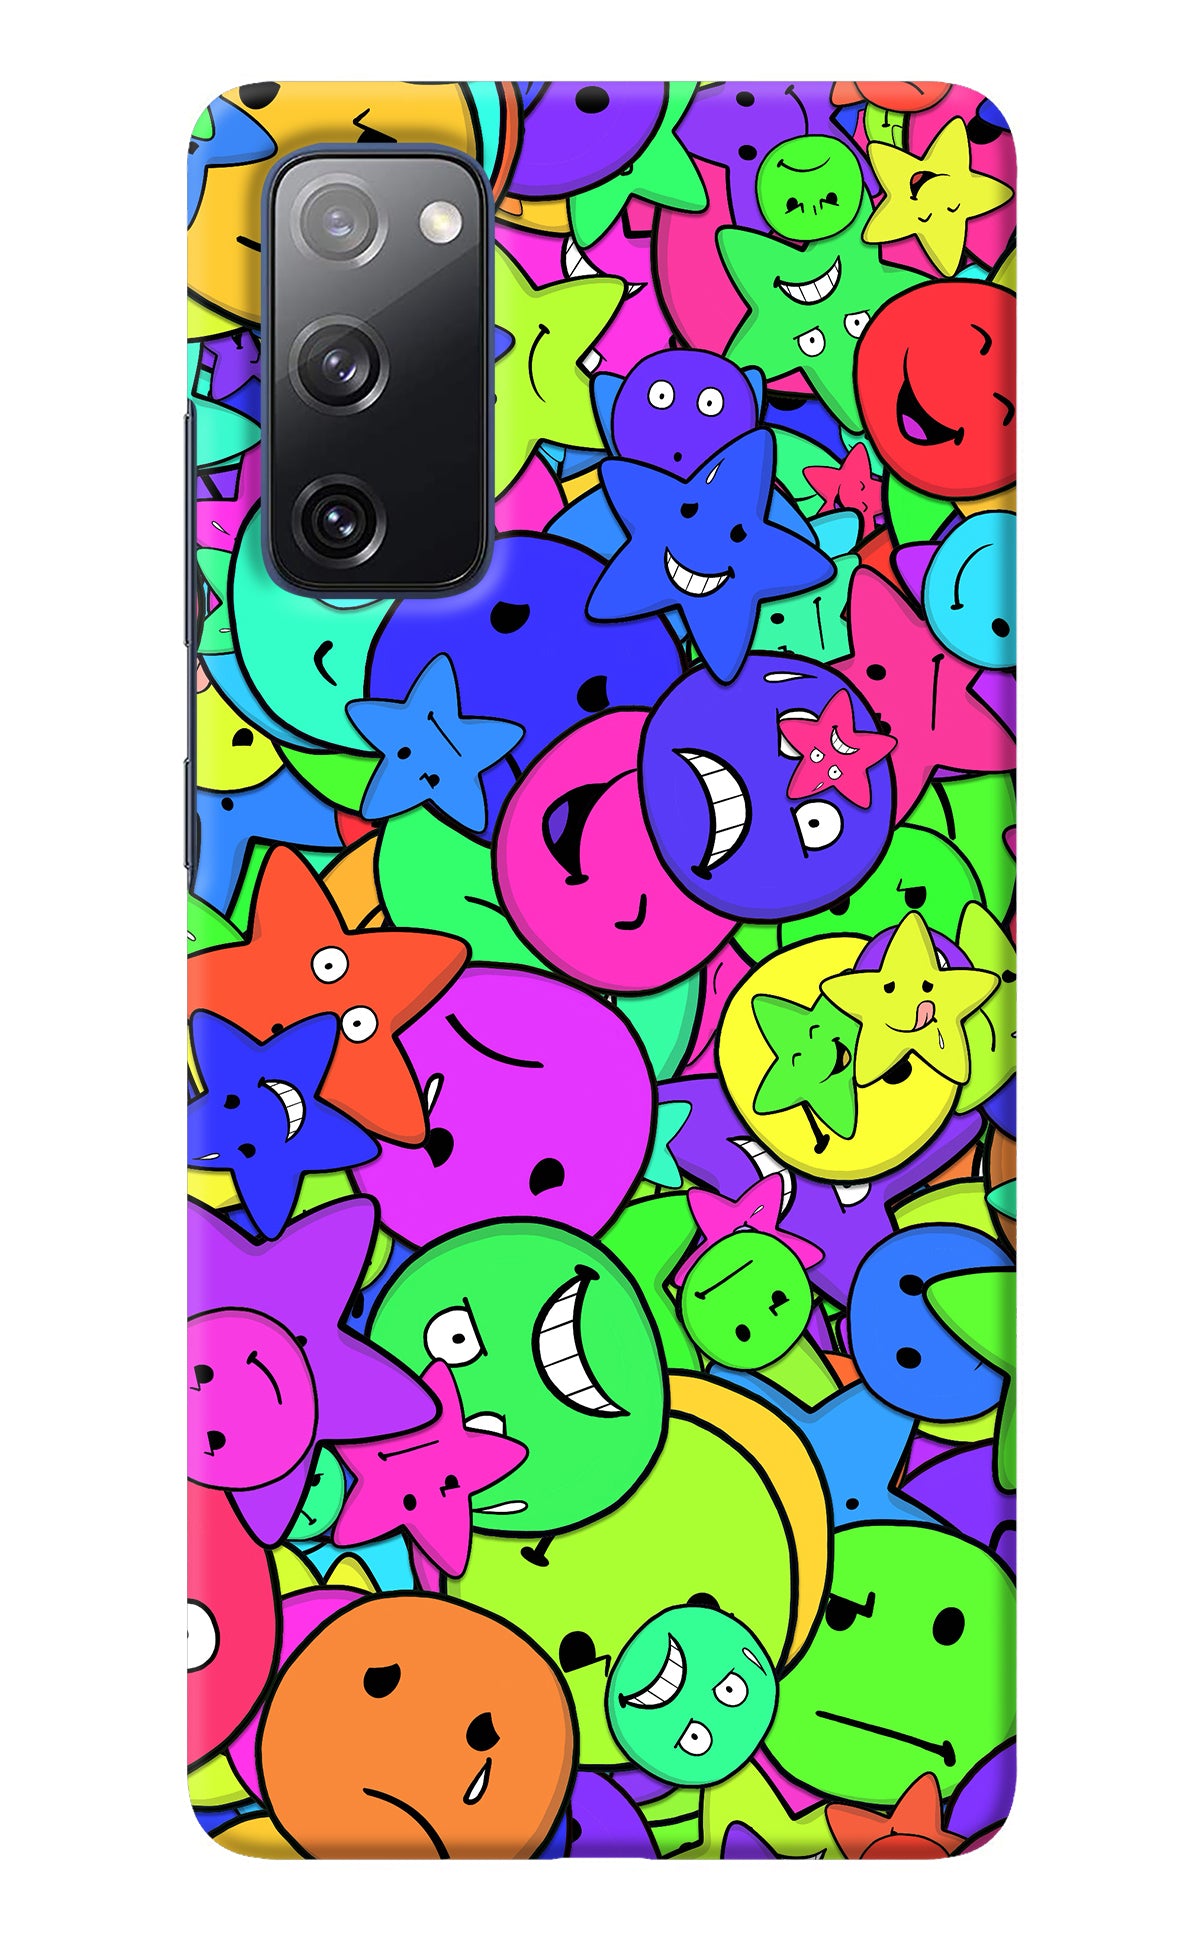 Fun Doodle Samsung S20 FE Back Cover